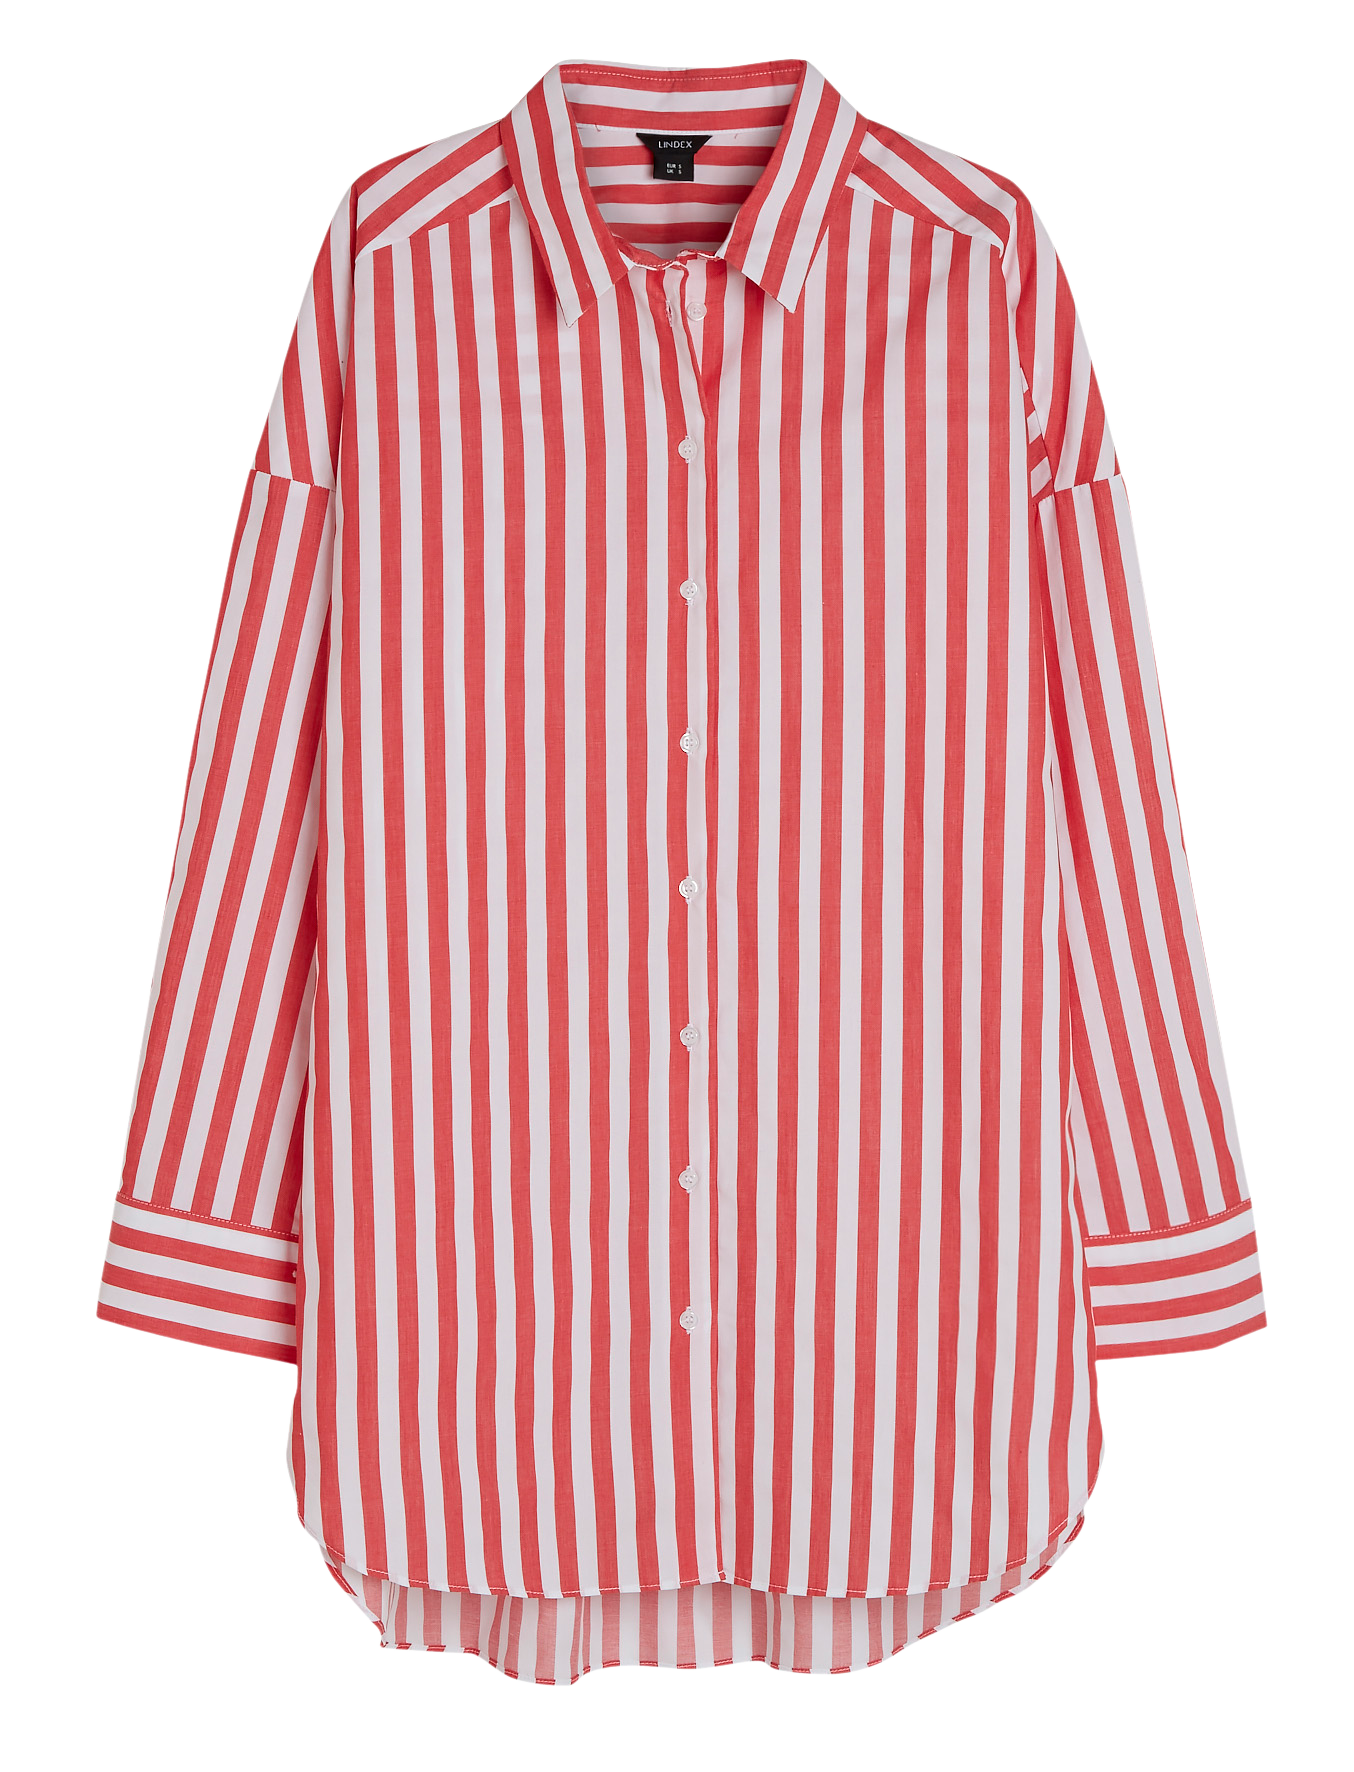 Red Striped Shirt £14.95 | Lindex